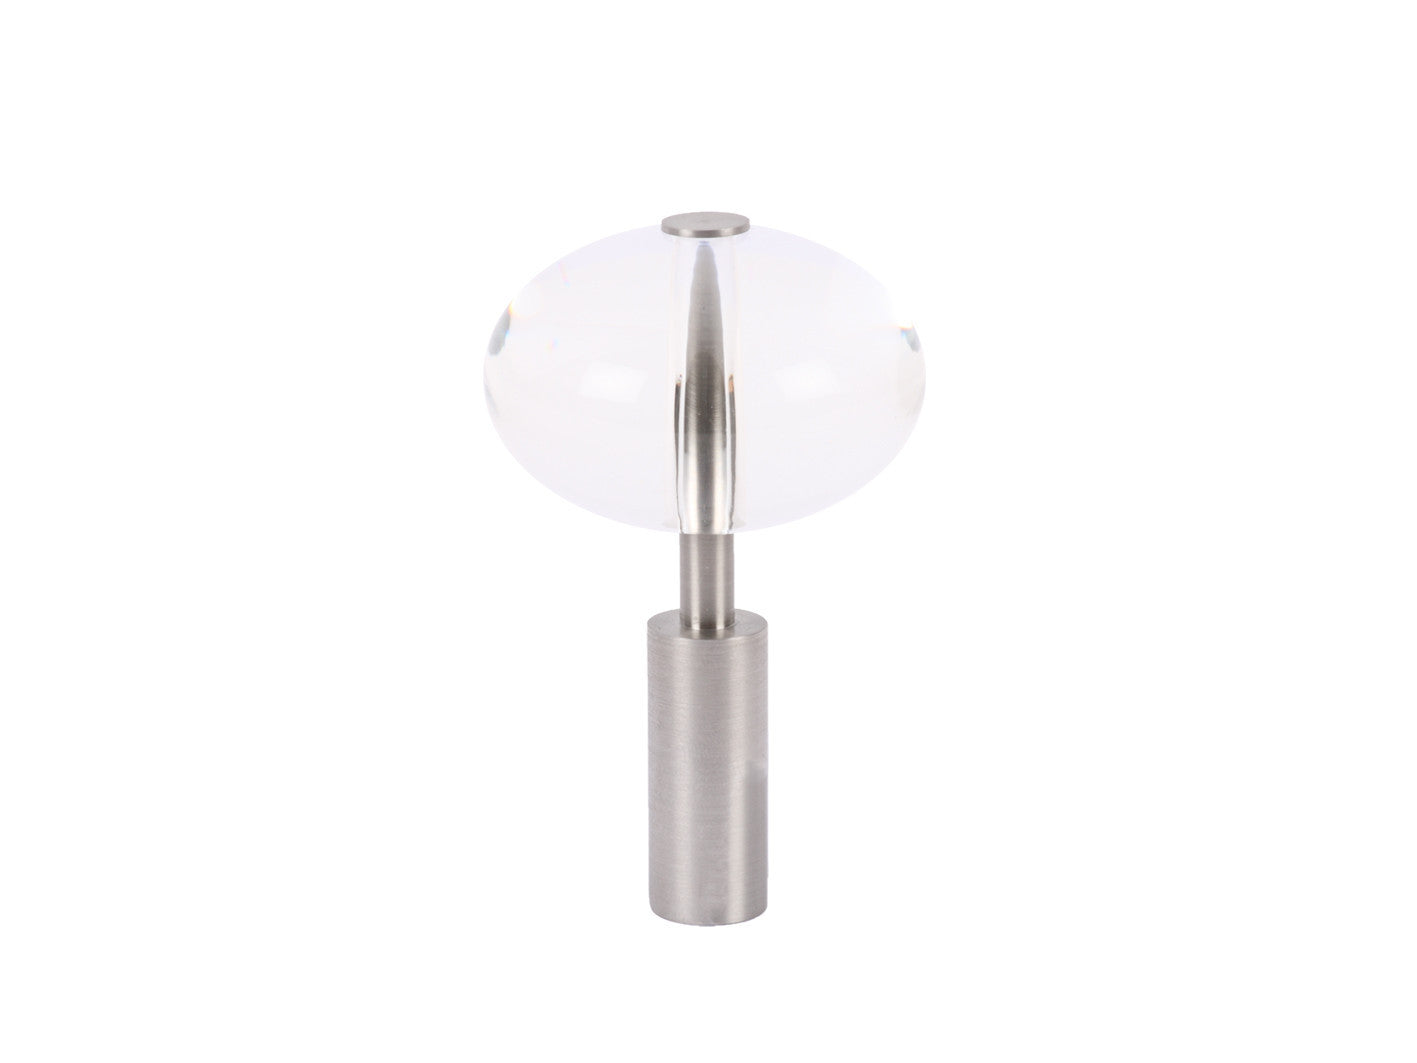 Acrylic ellipse finial in stainless steel for 19mm dia. curtain poles